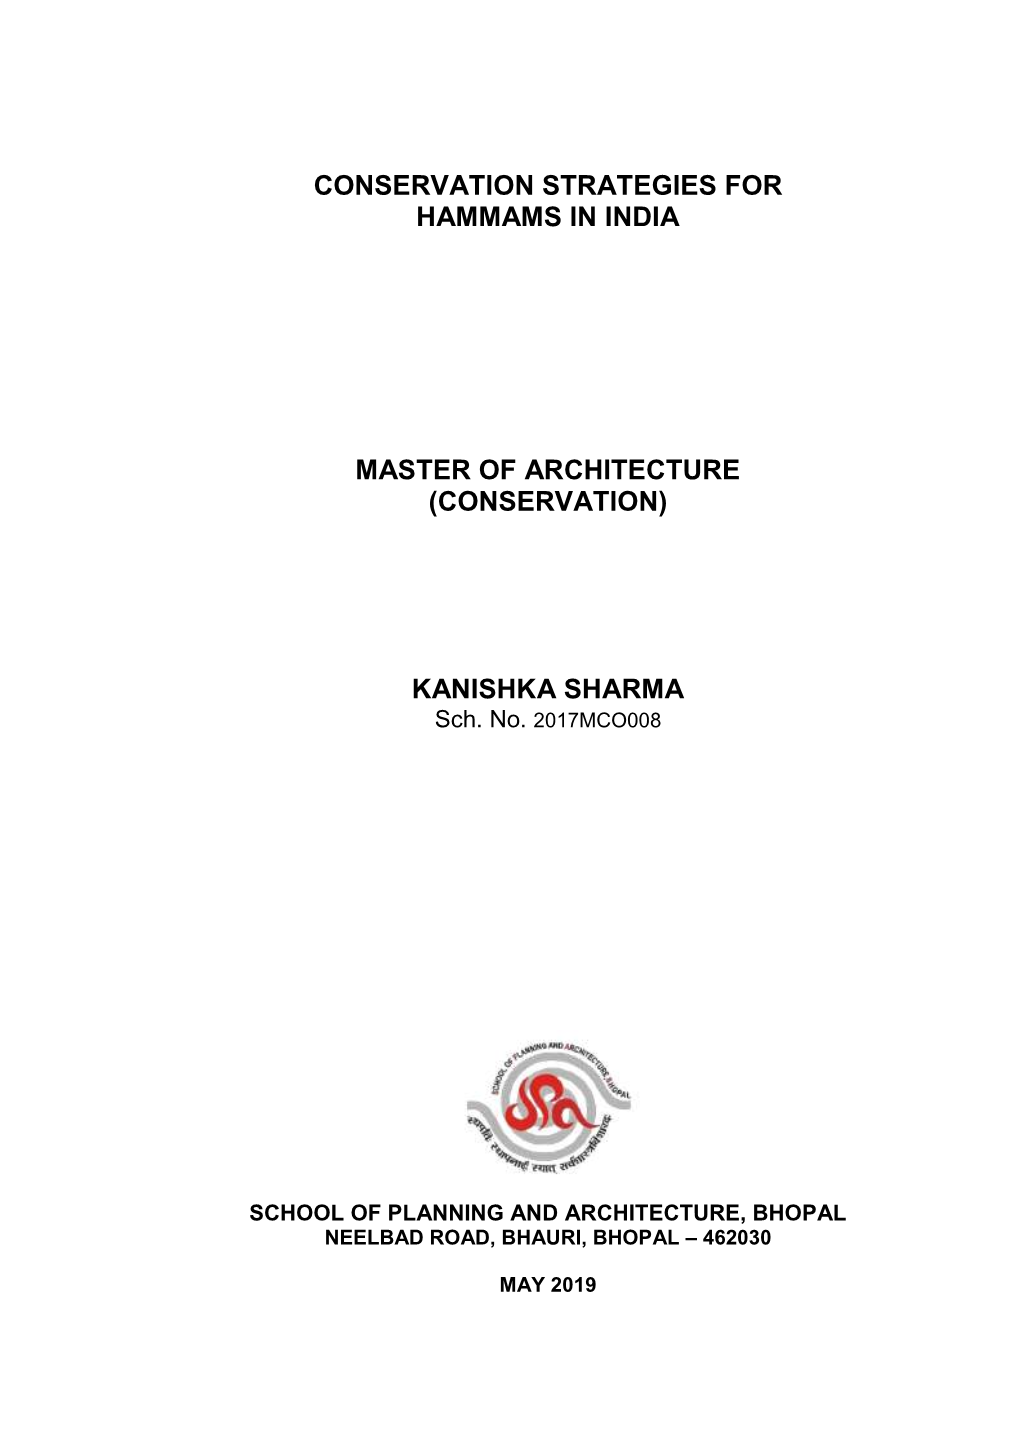 Conservation Strategies for Hammams in India Master of Architecture